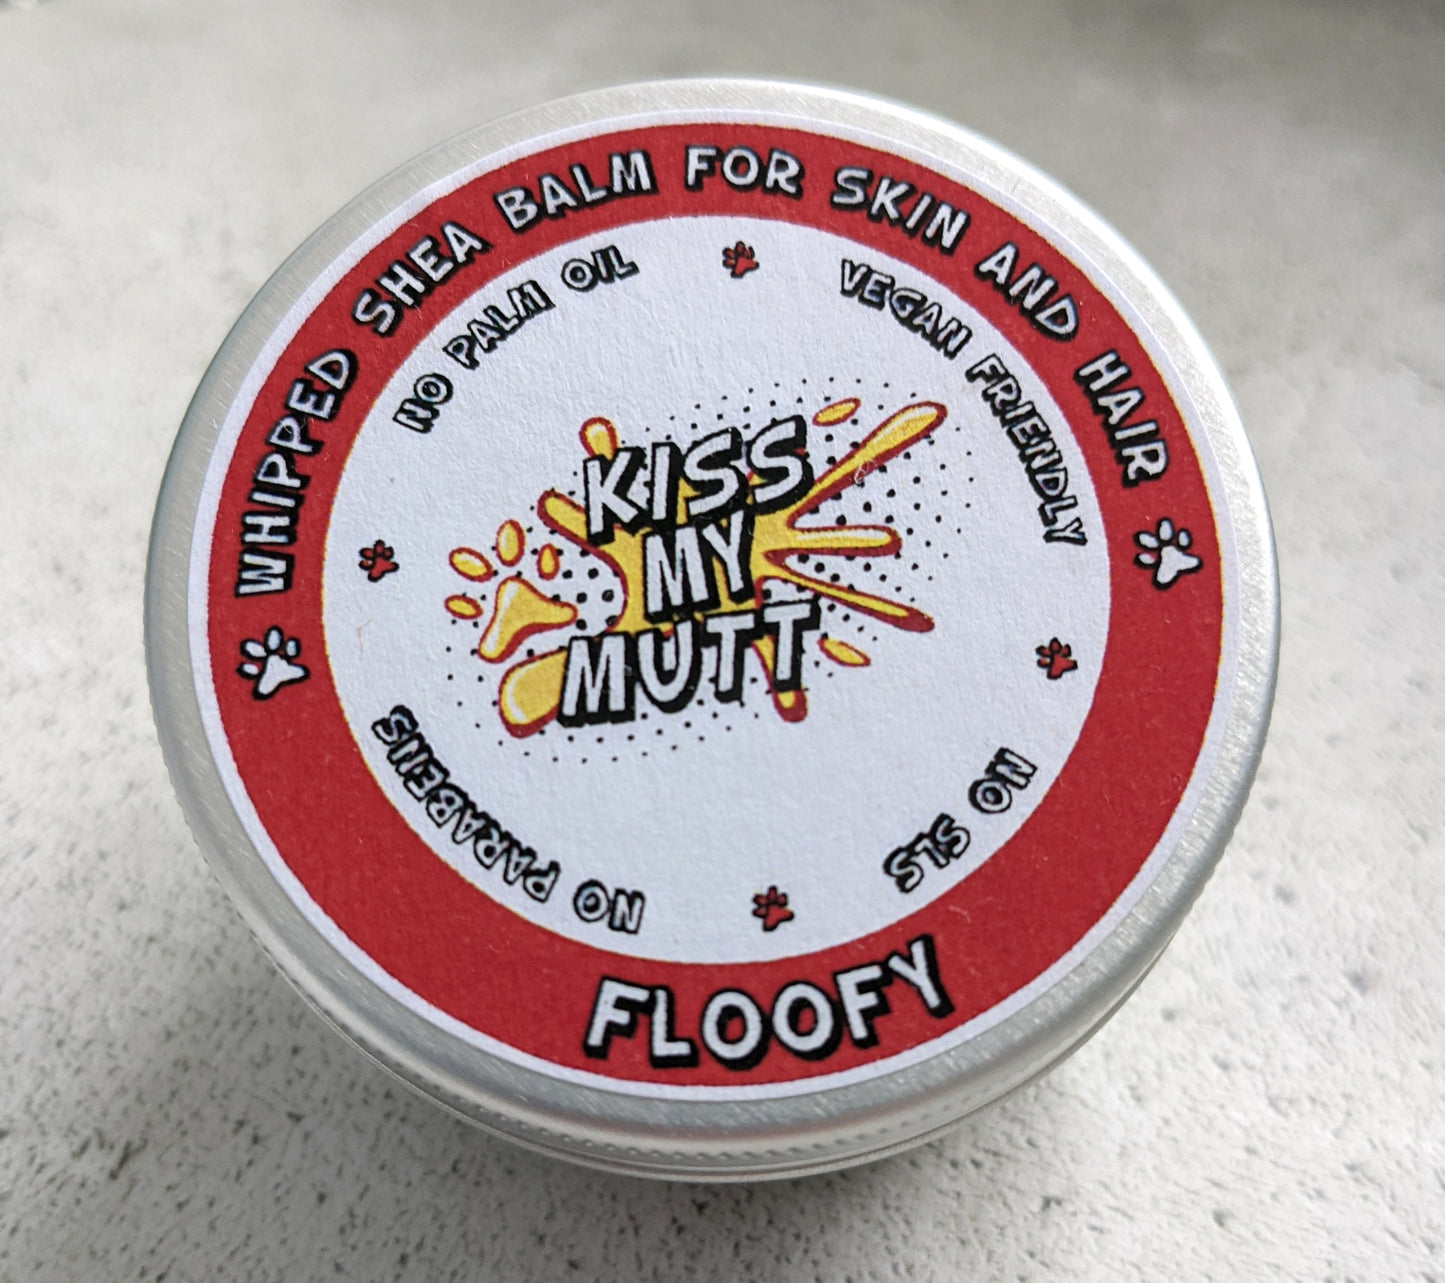 Floof - Fragrance Free whipped butter